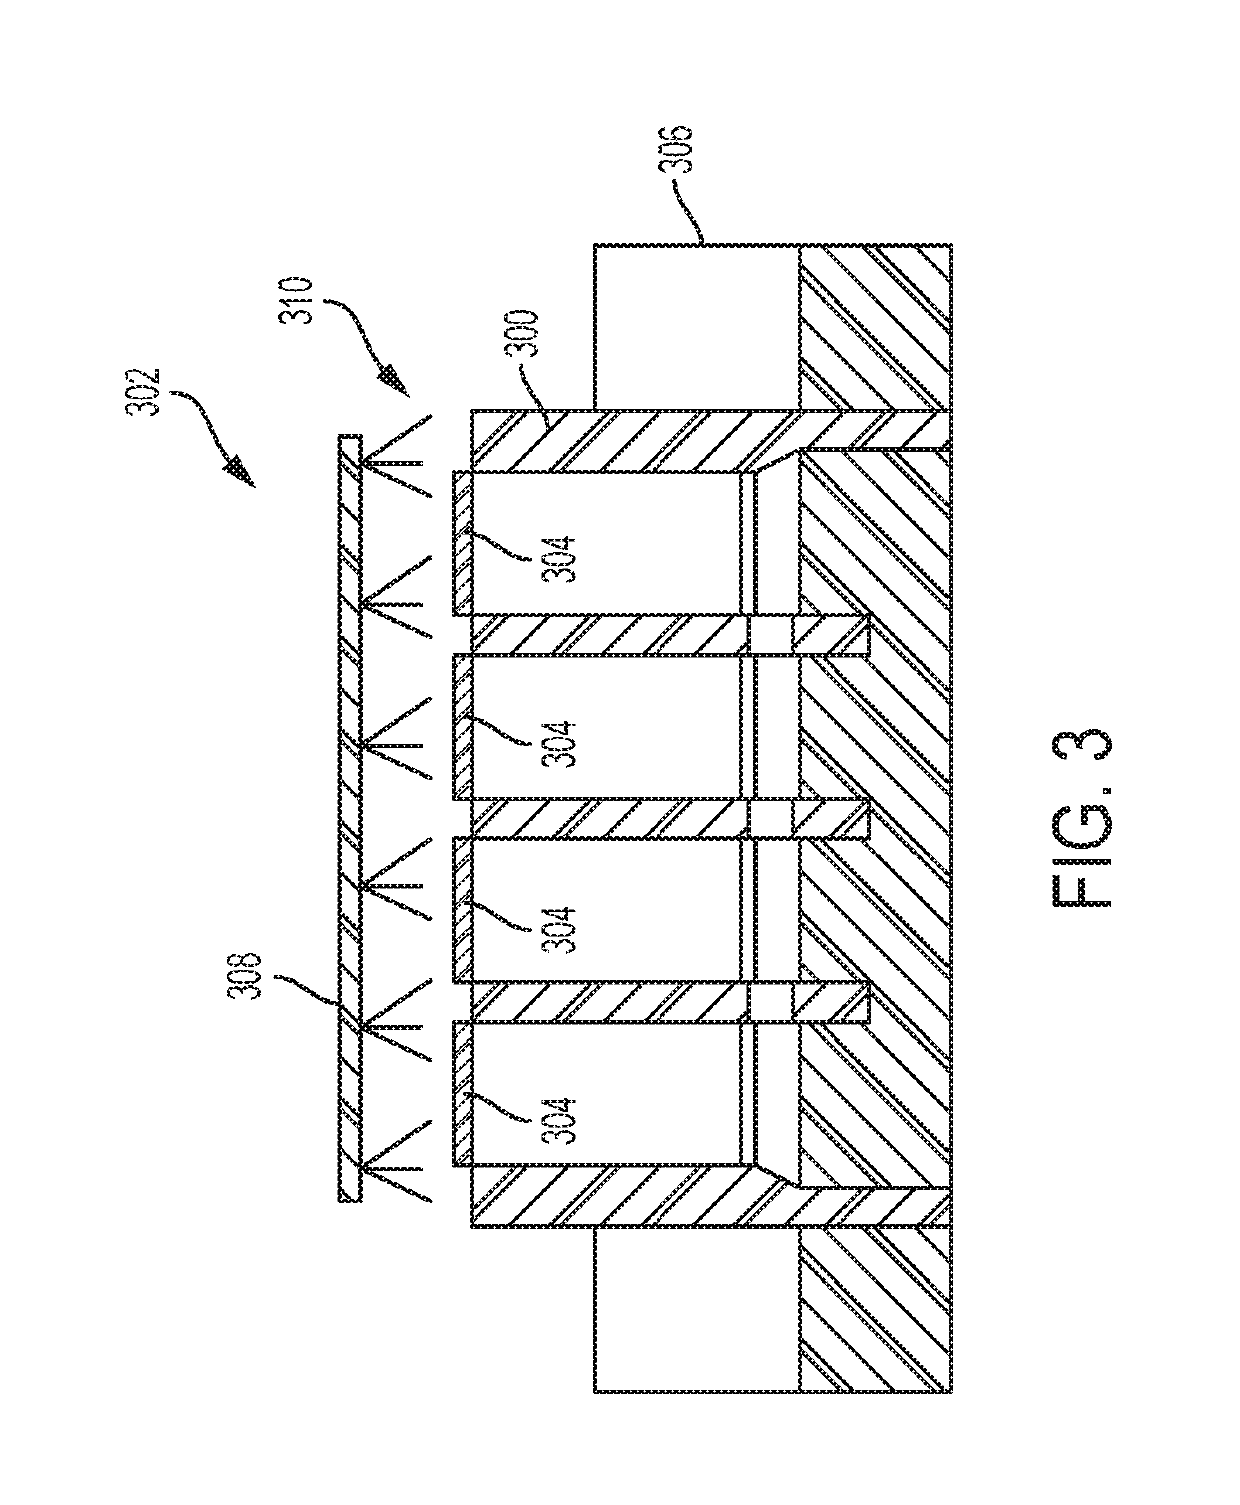 Method and system for processing an automotive engine block